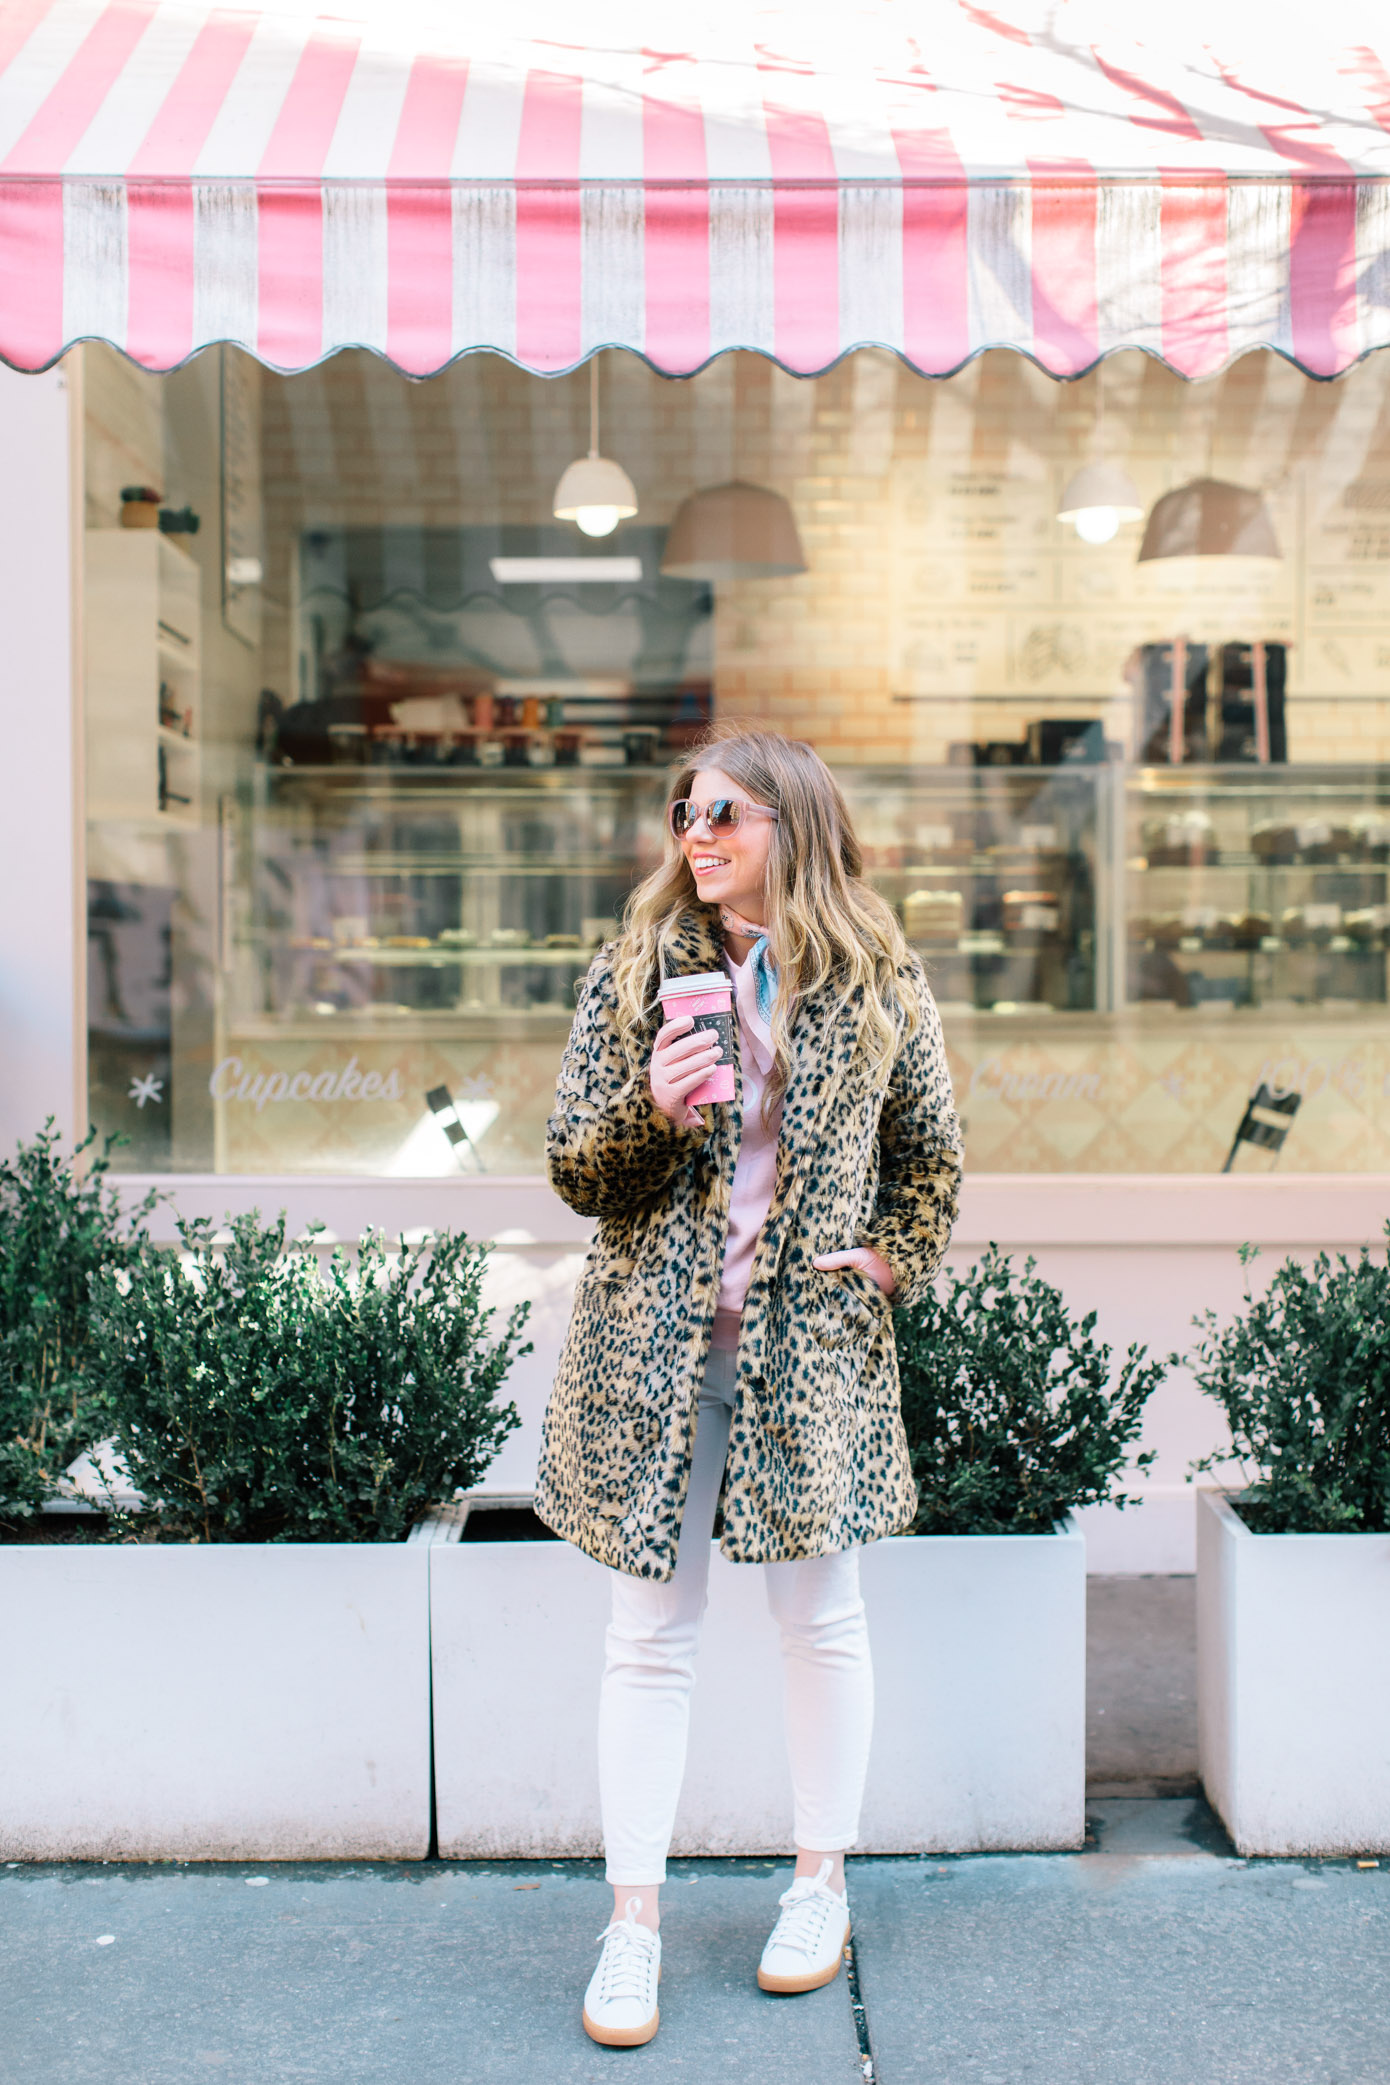 Most Instagrammable NYC Coffee Shops | Louella Reese Life & Style Blog 